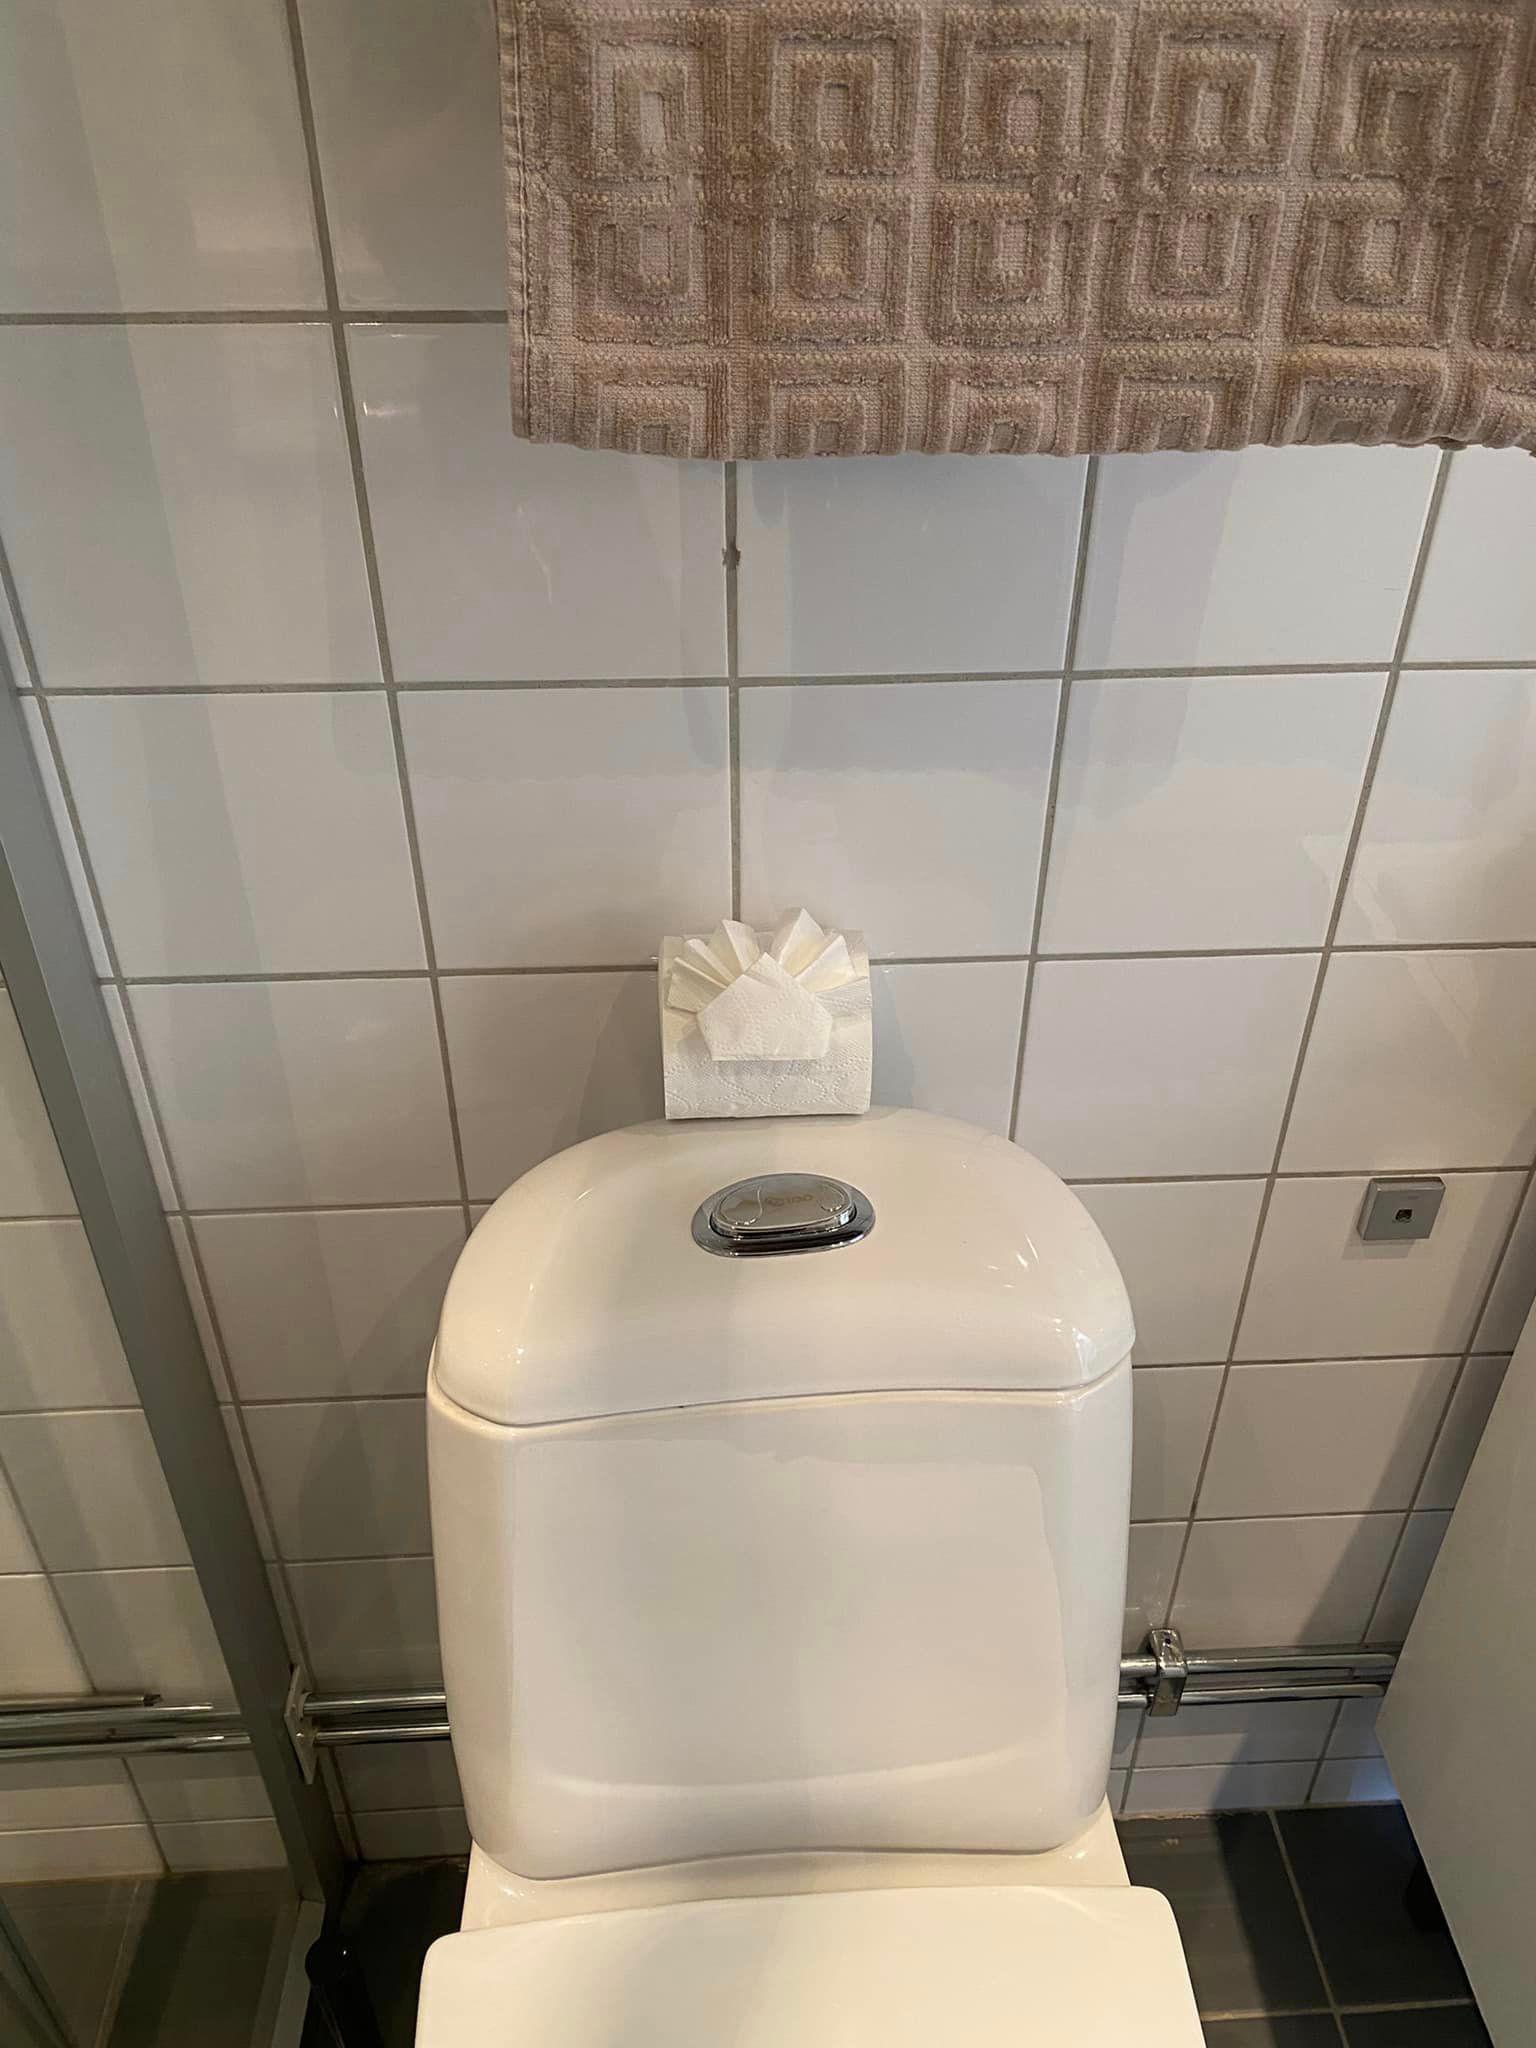 Toilet paper folded in a decorative way.